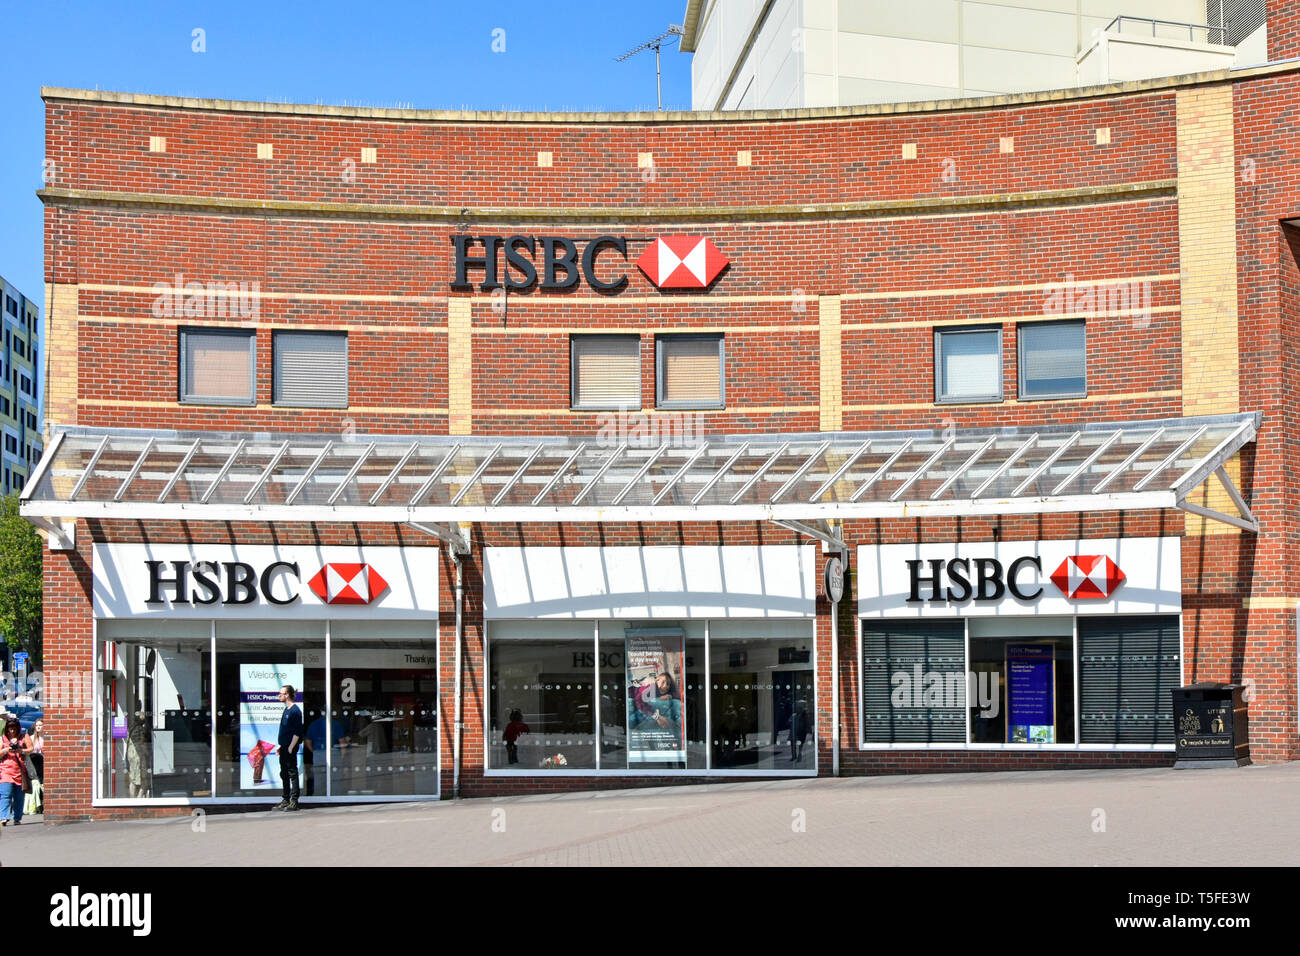 View of HSBC signs & logos on shop front window facade of brick built  high street bank building a major UK banking branch business in Southend Essex Stock Photo